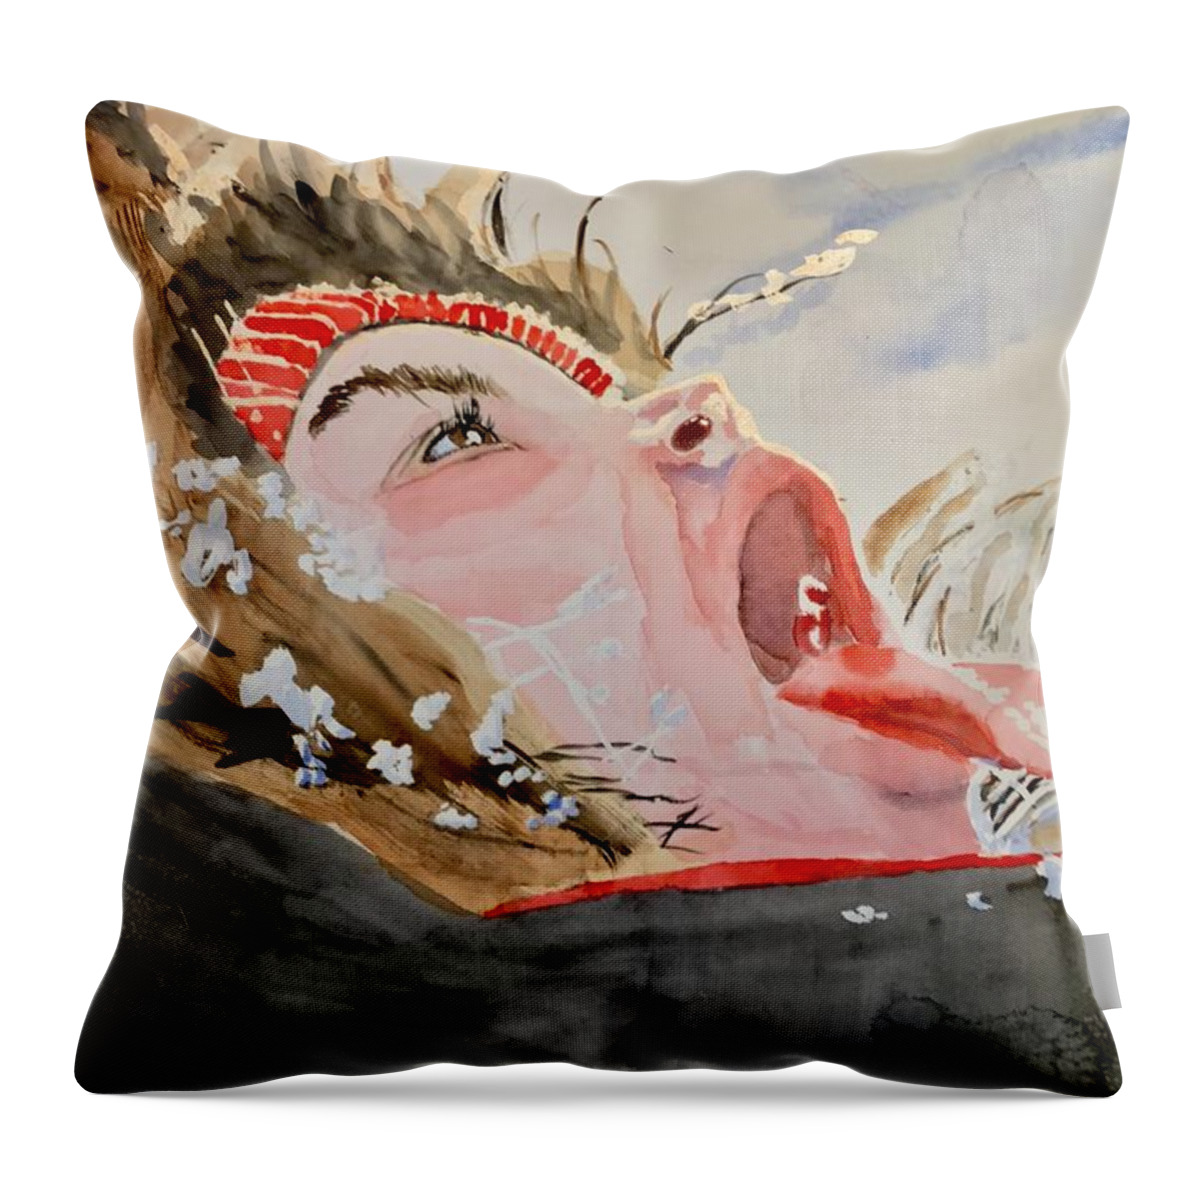 Watercolor Throw Pillow featuring the painting Snow Catcher by Bryan Brouwer